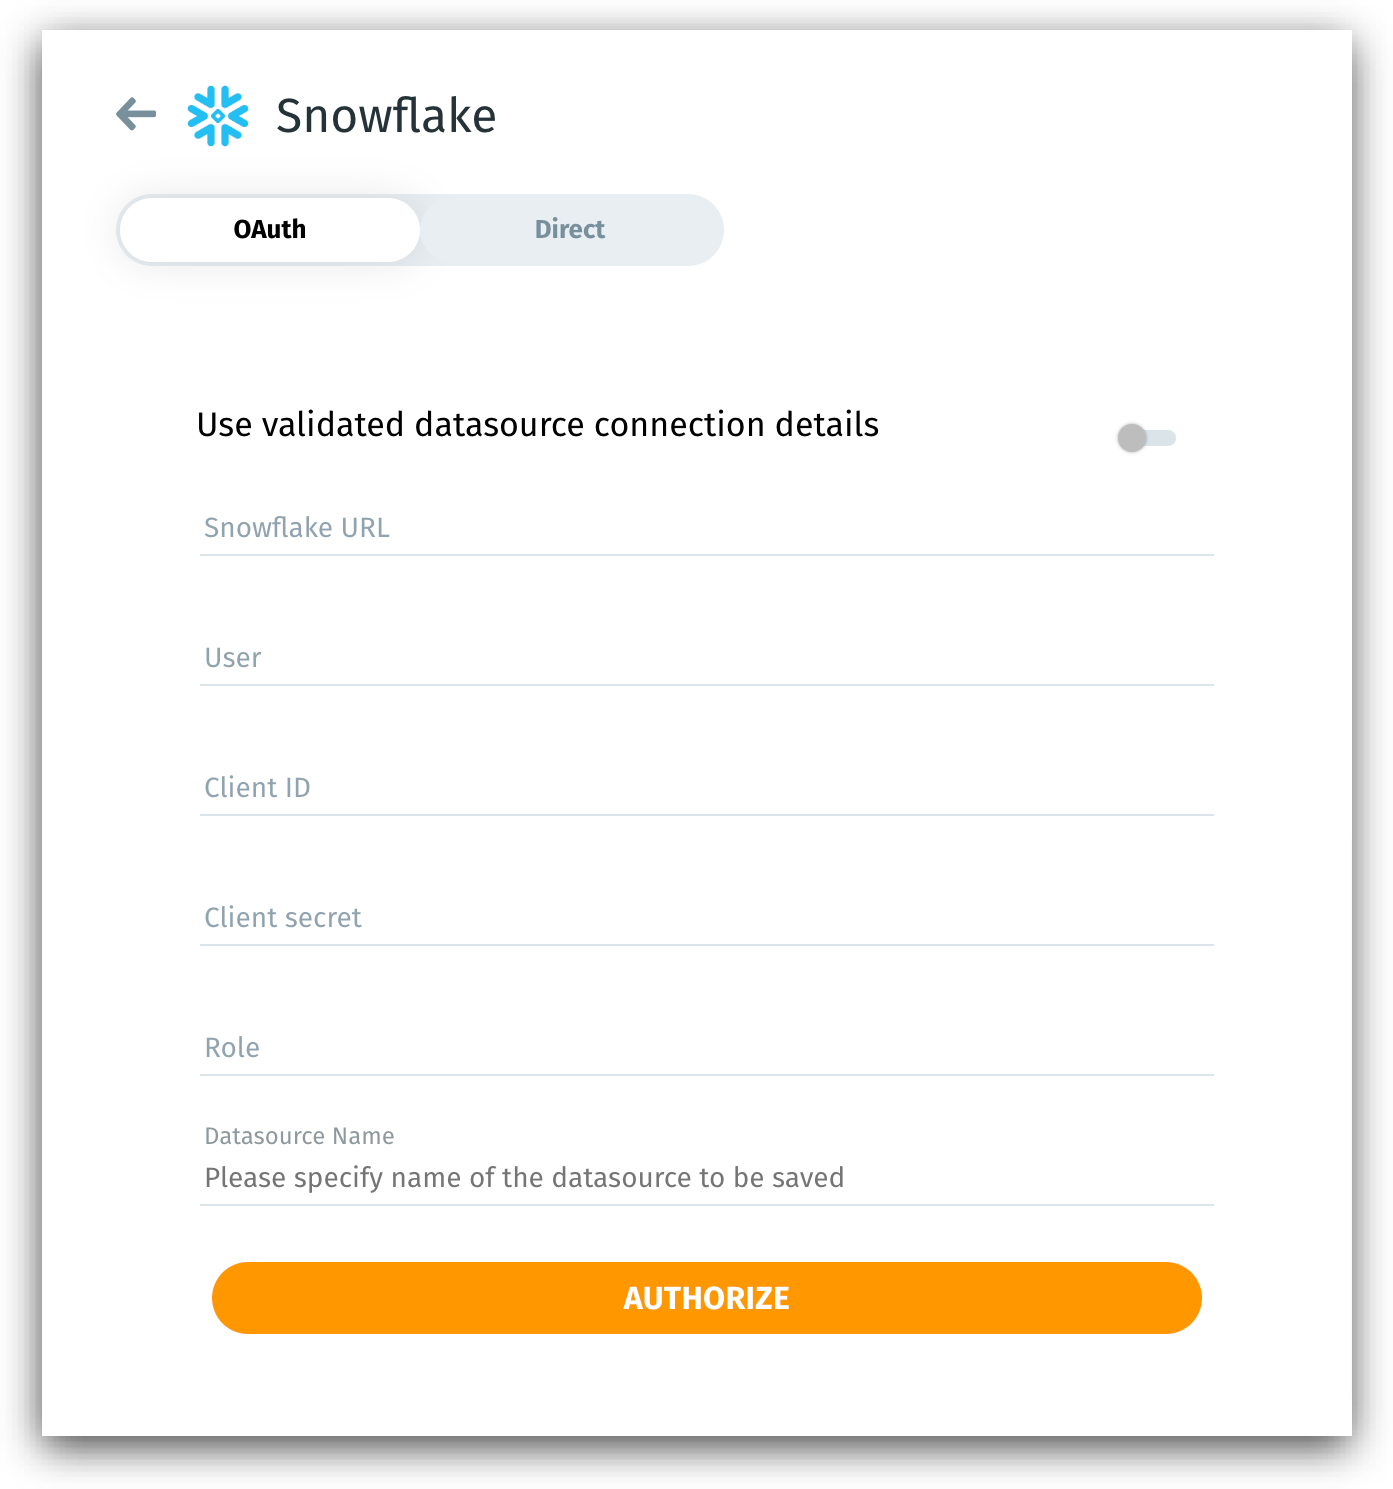 Introducing OAuth based authentication for Snowflake integration